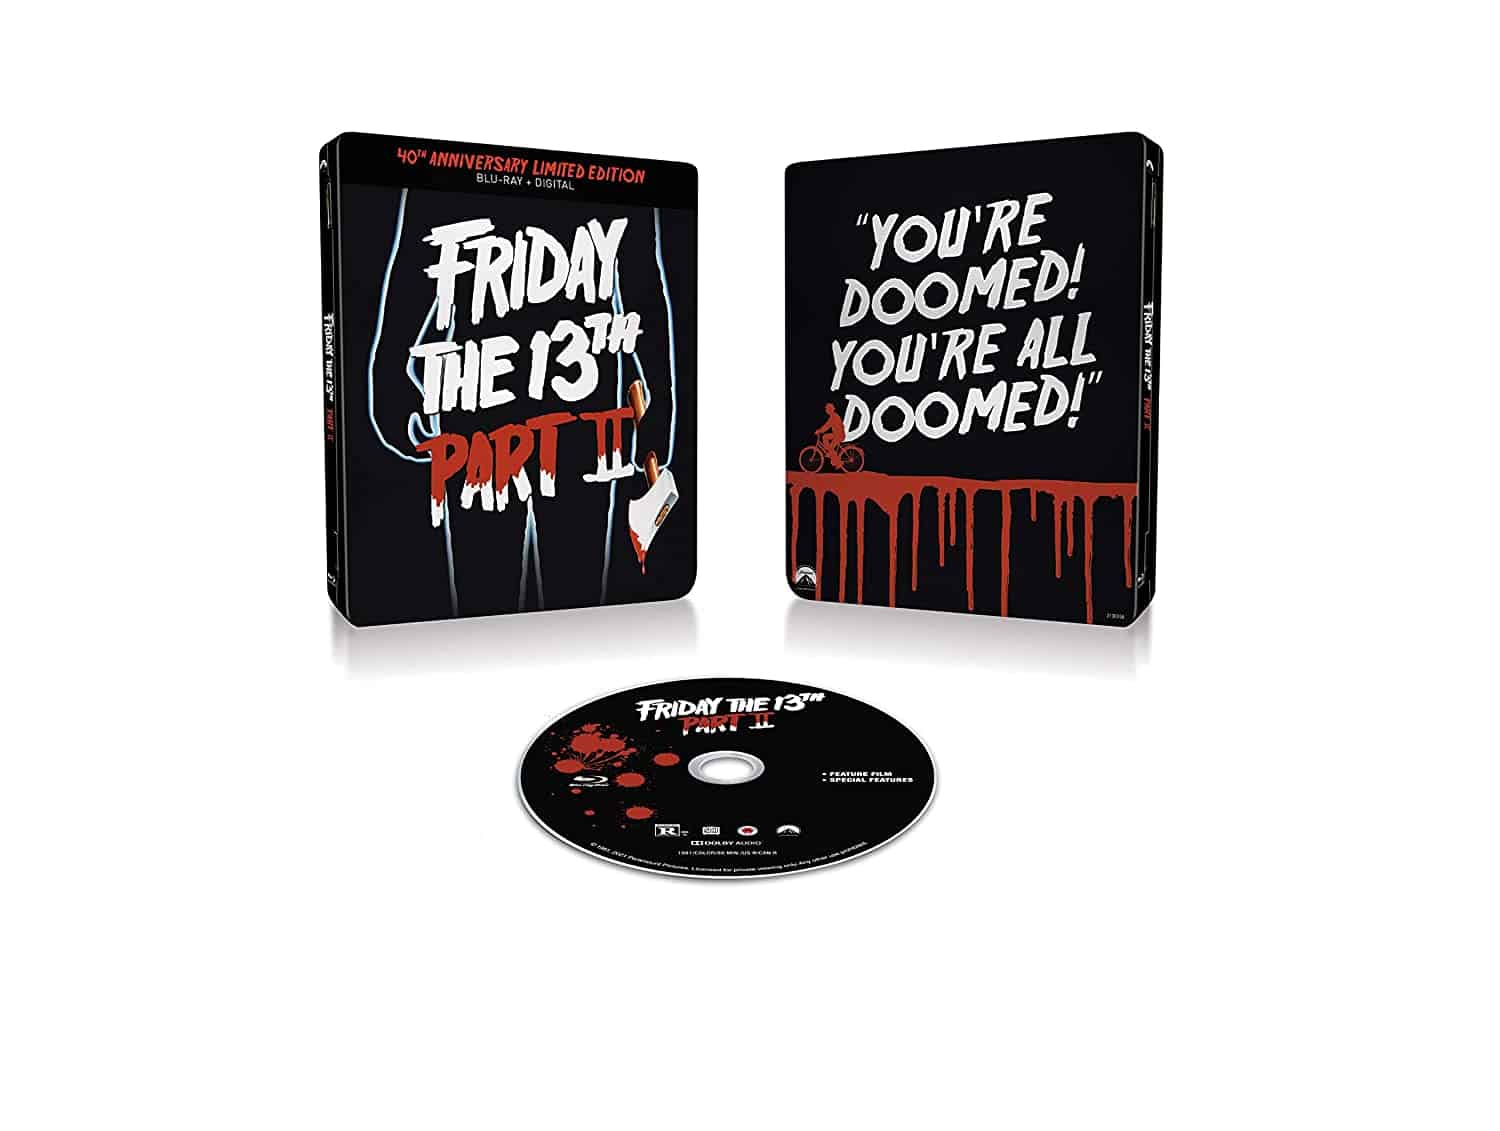 fRIDAY THE 13TH PART 3 gets a STEELBOOK